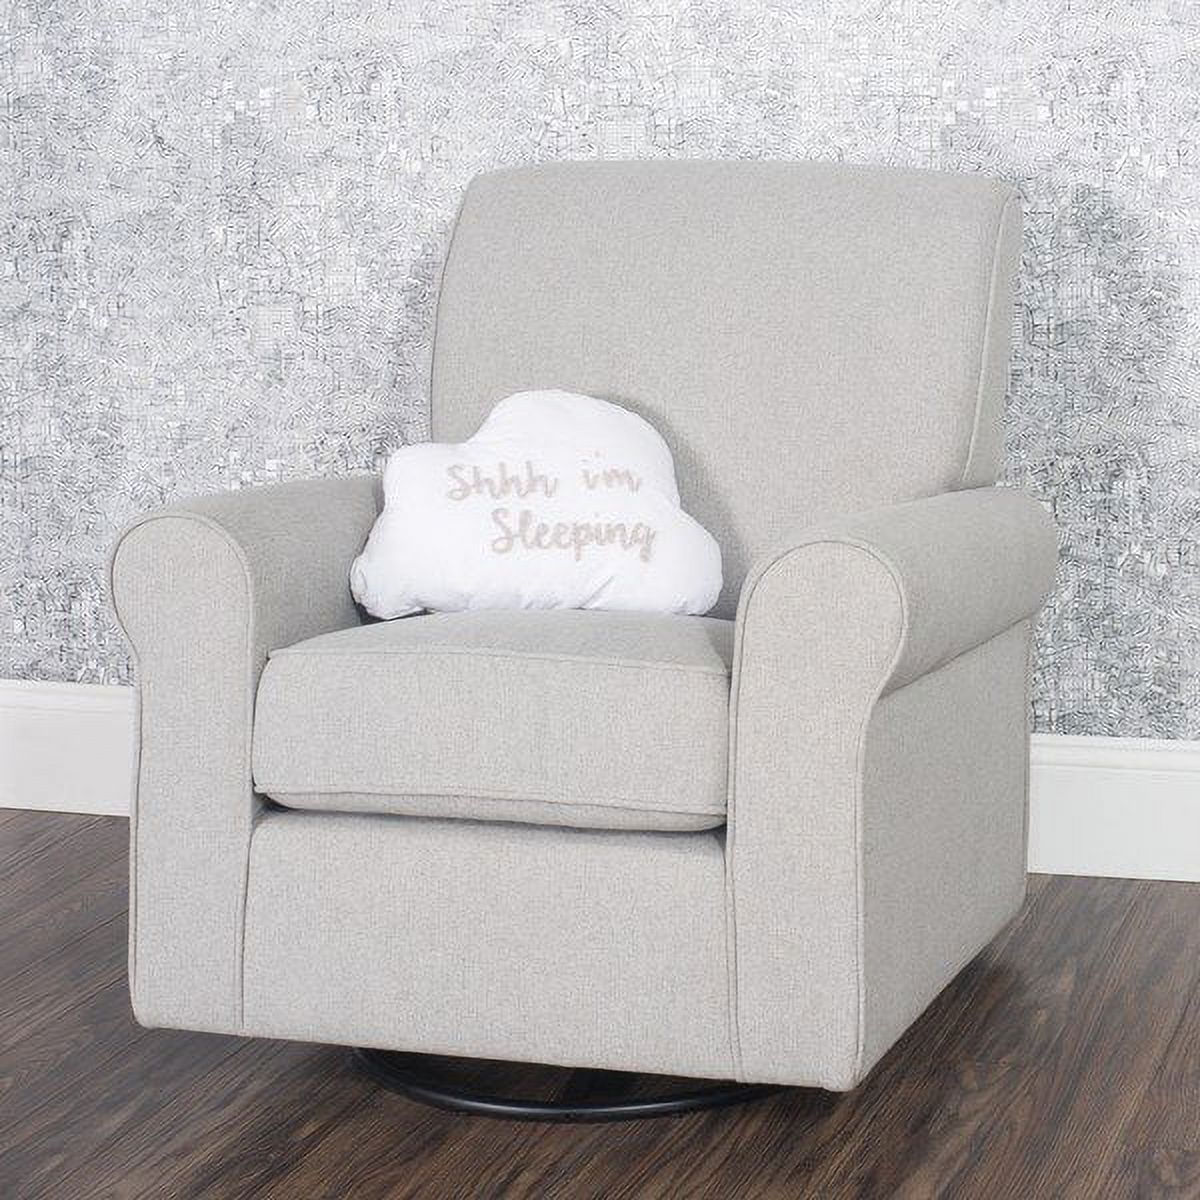 Serene Upholstered Swivel Glider Rocker Chair in Flecked Gray by Forever Eclectic - image 4 of 6